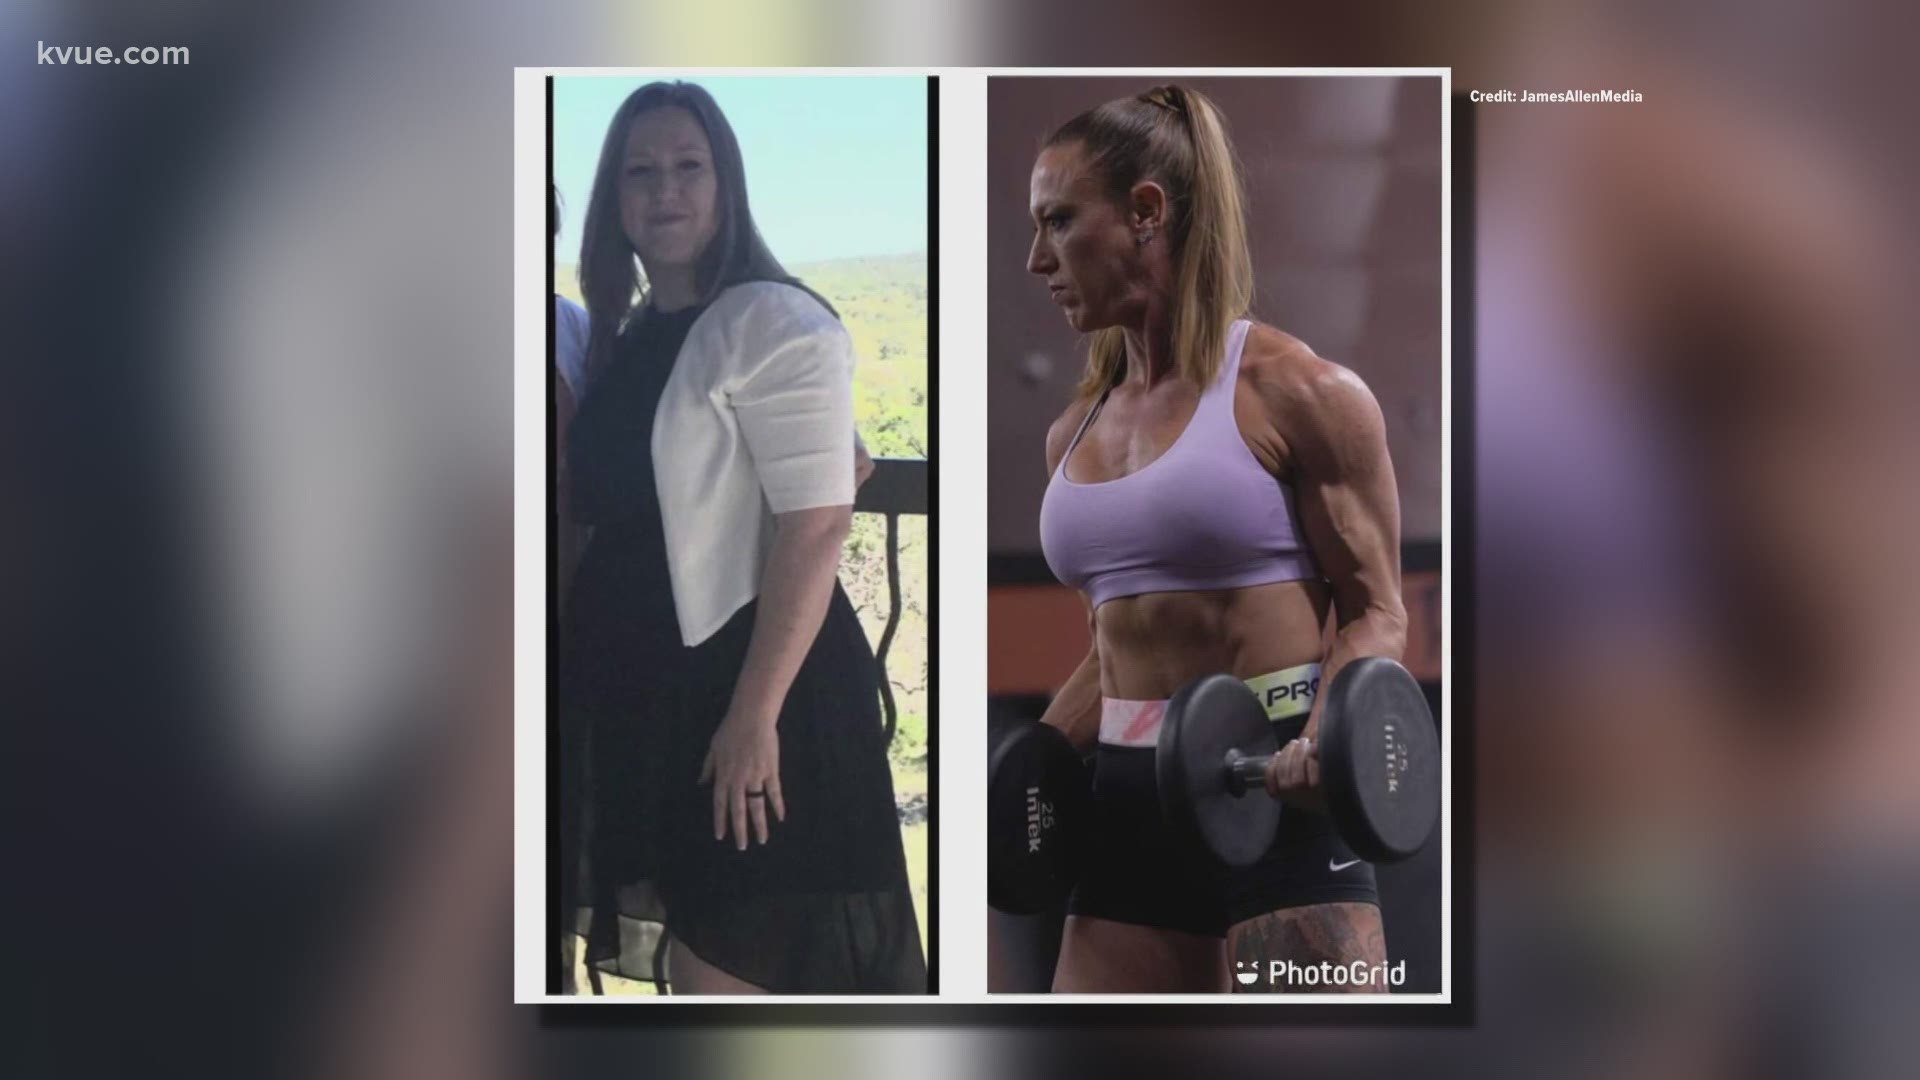 On this Mother's Day weekend, a 41-year-old mom-turned-figure competitor hopes her story will remind other moms that self-care is key to parenting.